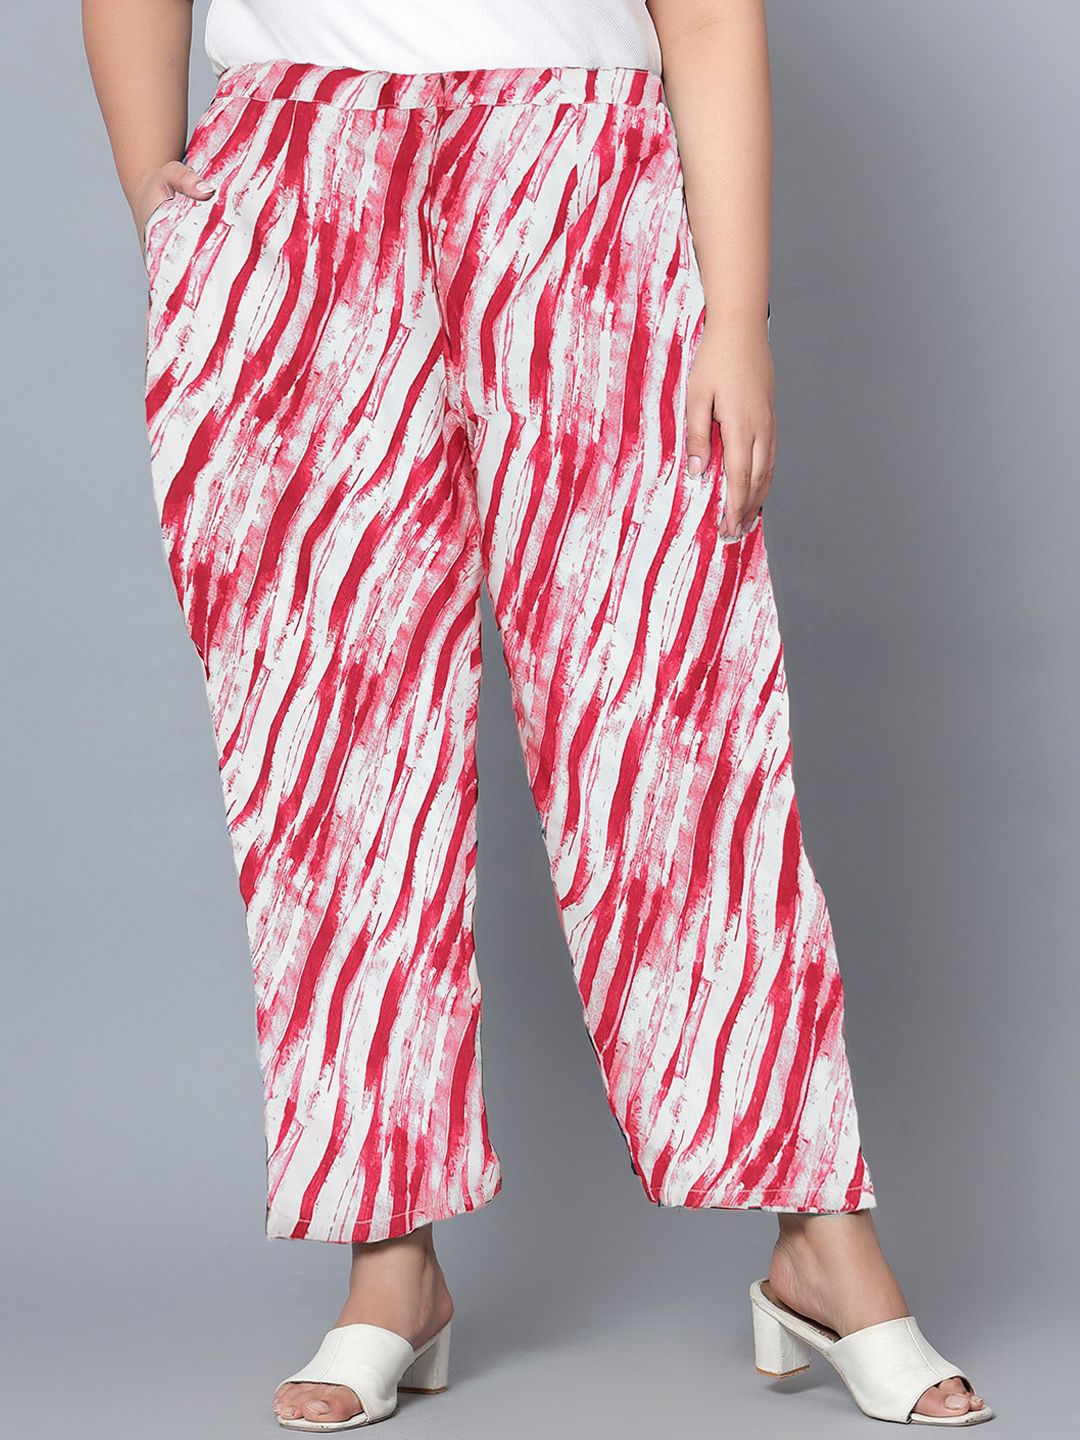 Indietoga Women Comfort Abstract Printed Easy Wash Trousers Price in India